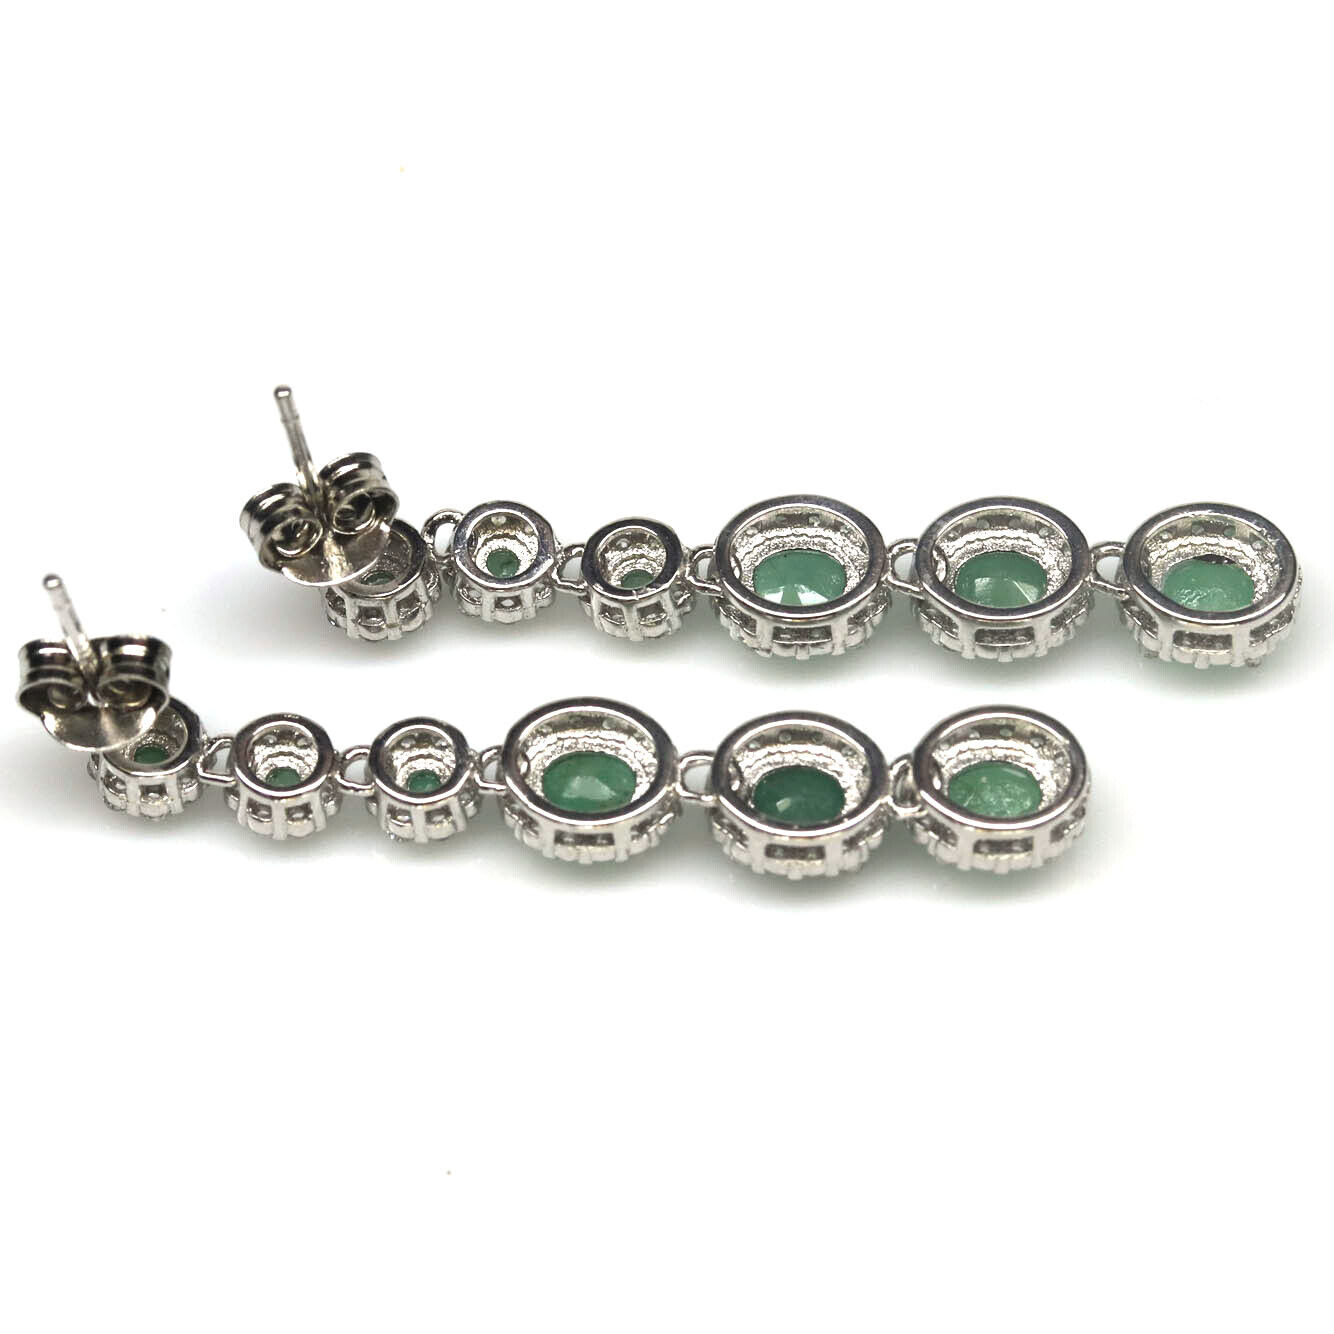 A pair of 925 silver drop earrings set with oval cut emeralds and white stones, L. 3.8cm. - Image 2 of 2